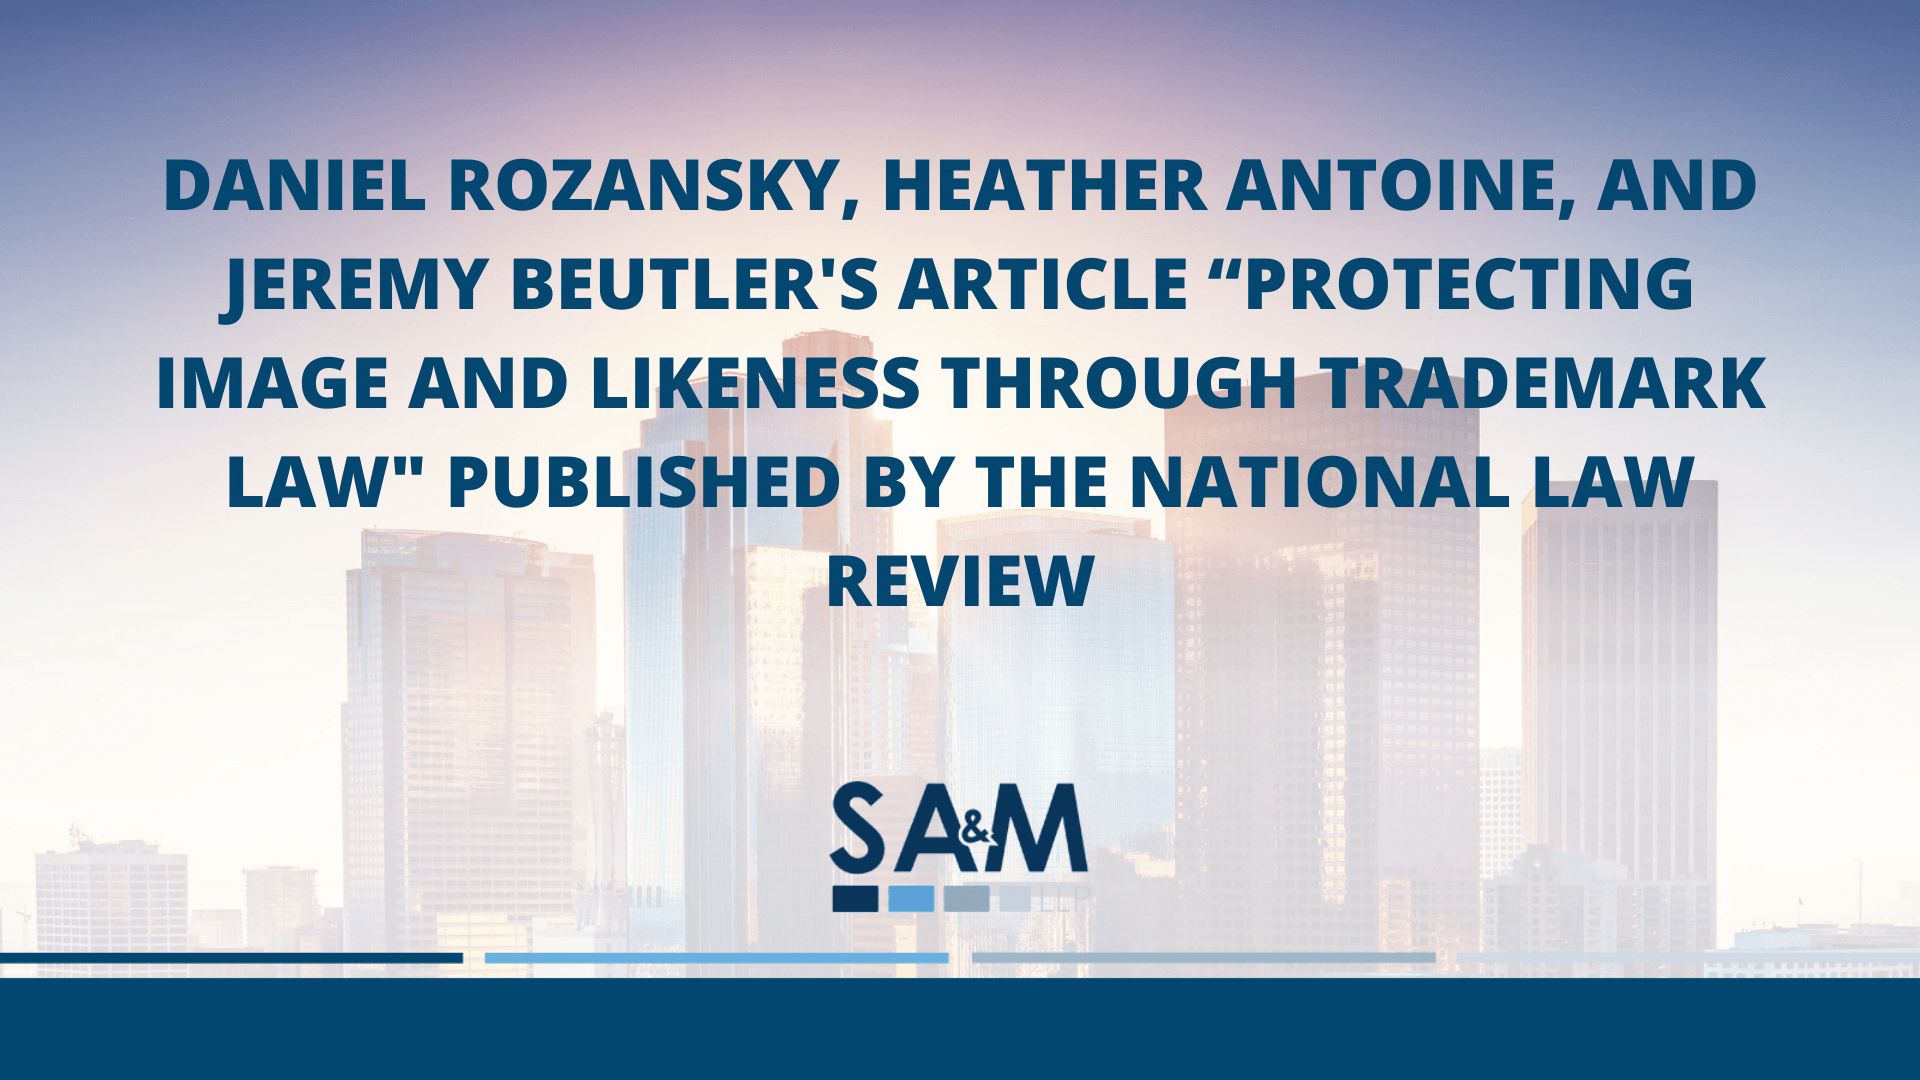 Daniel Rozansky, Heather Antoine, and Jeremy Beutler’s Article “Protecting Image and Likeness Through Trademark Law” Published by The National Law Review